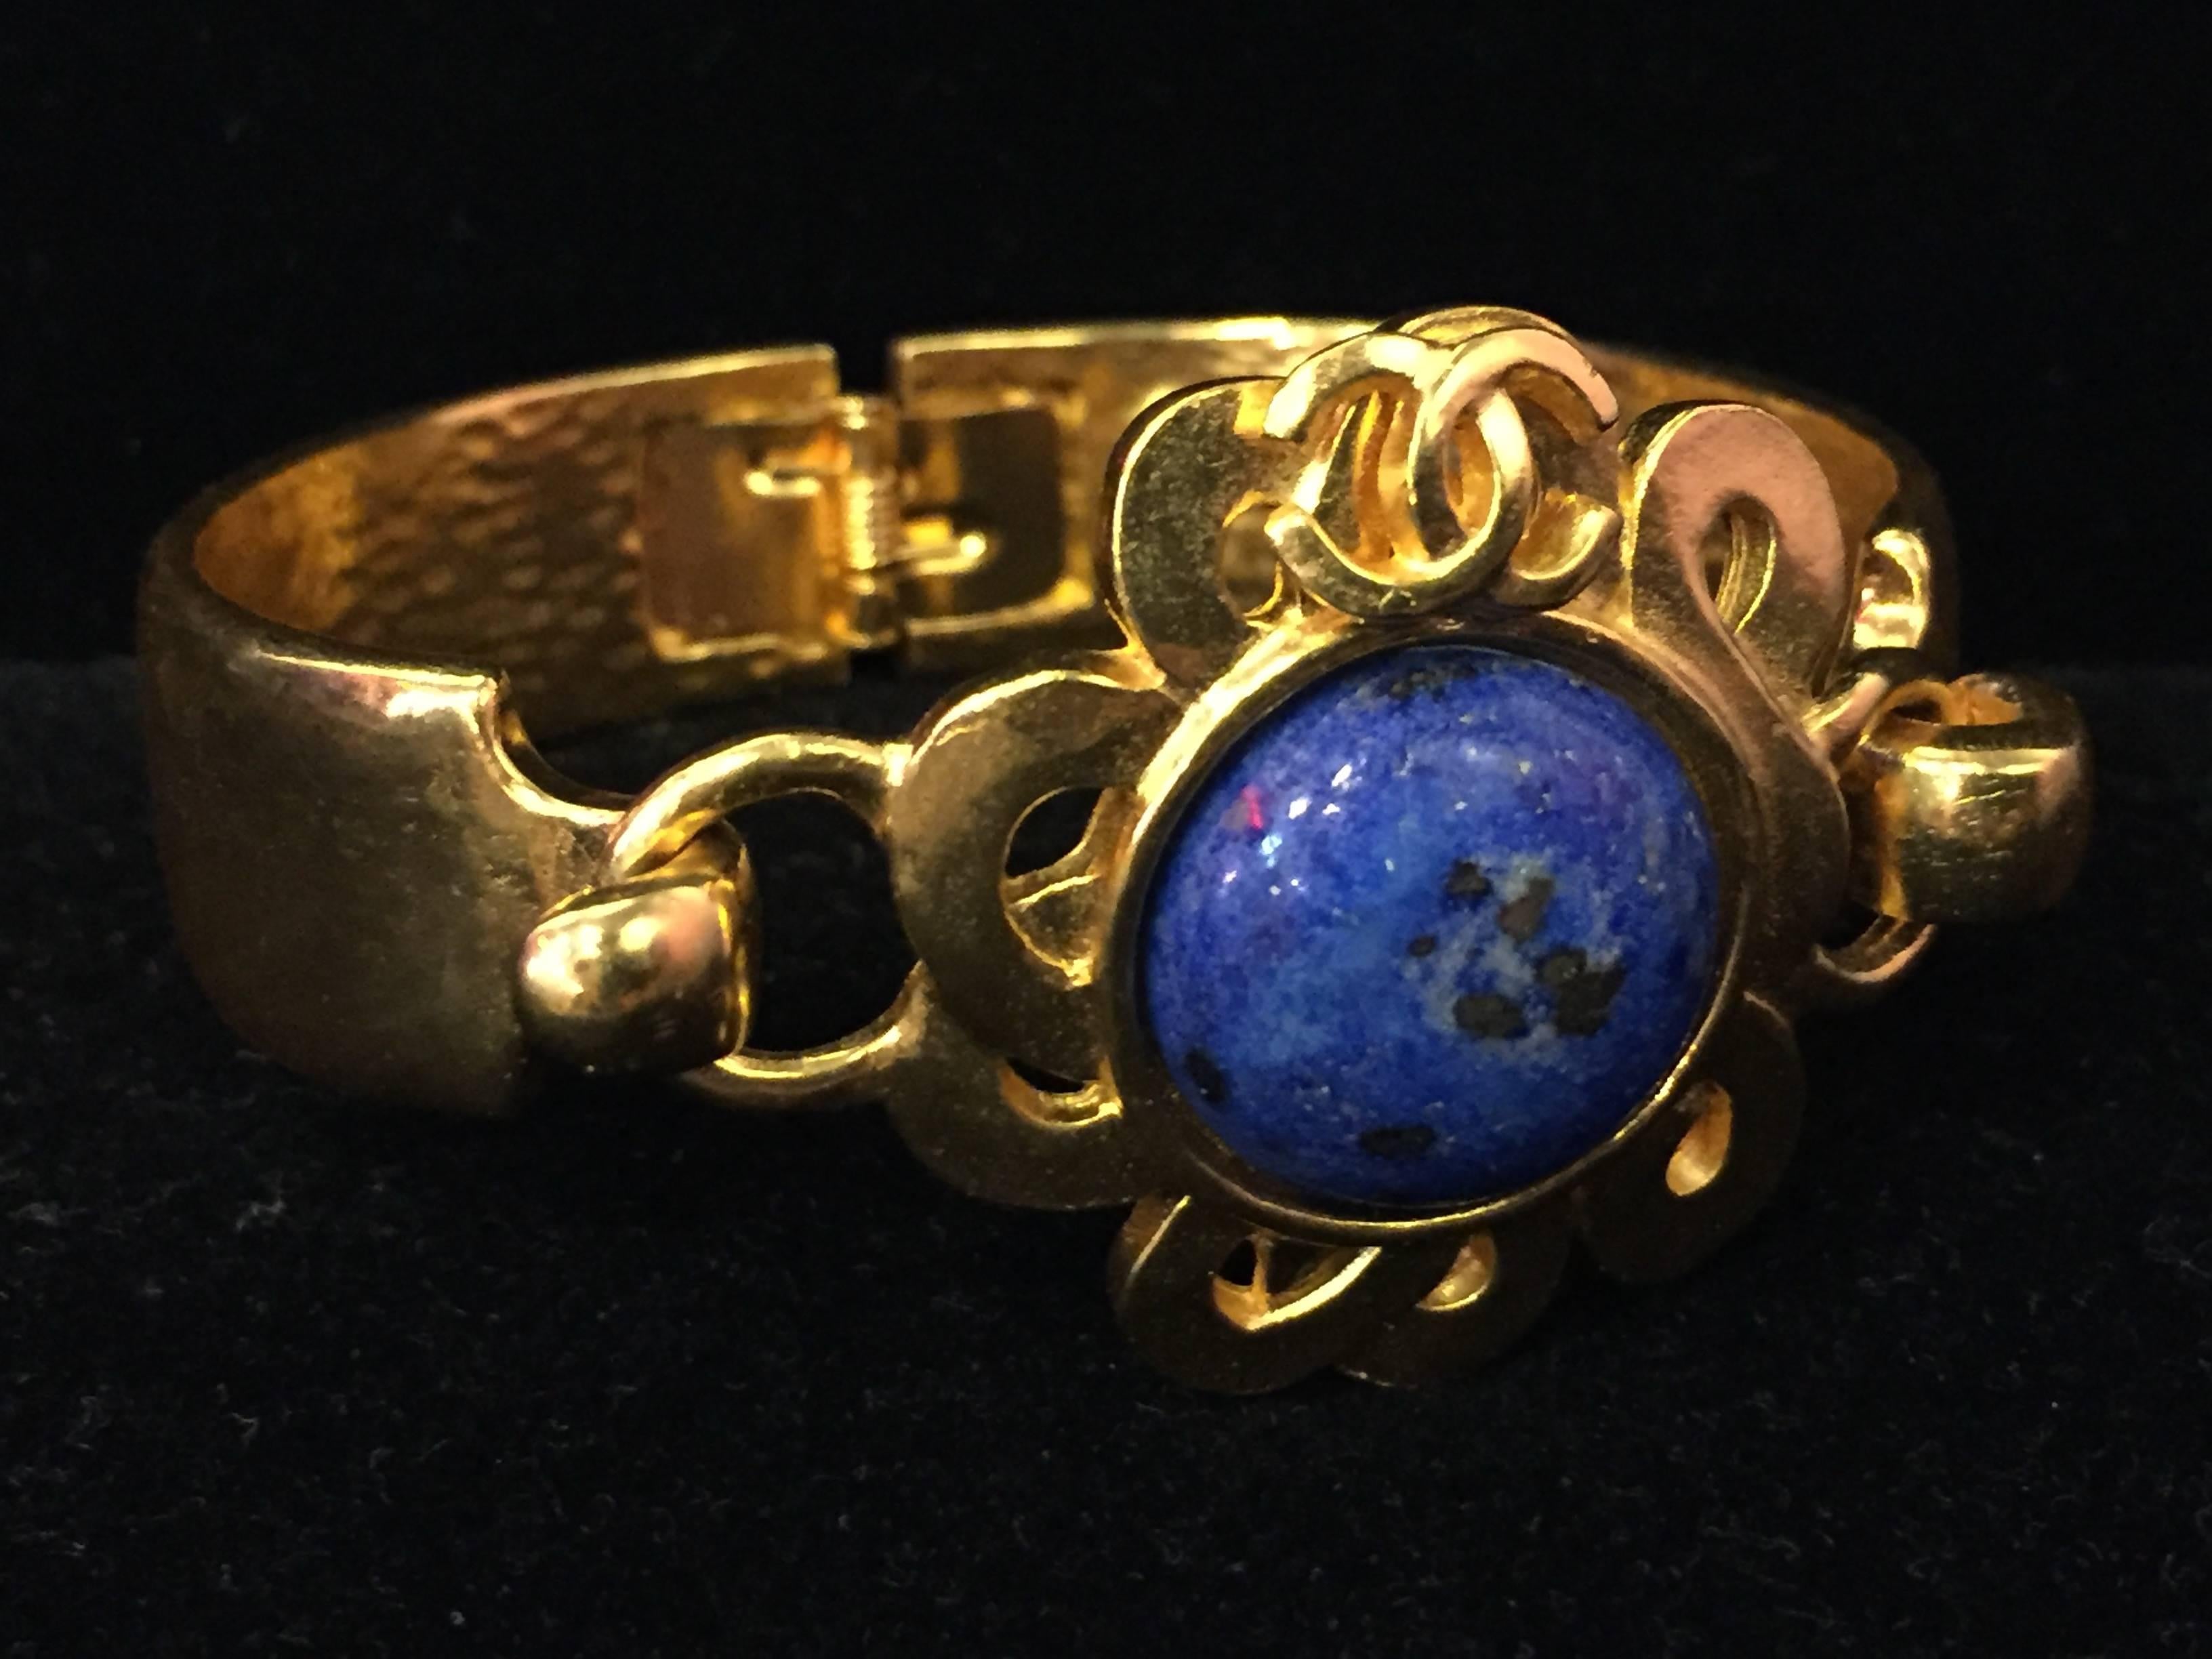 A fabulous 1997 gold-tone hinged bracelet with front medallion with hook closure.  Sun motif with a lapis lazuli center stone. 